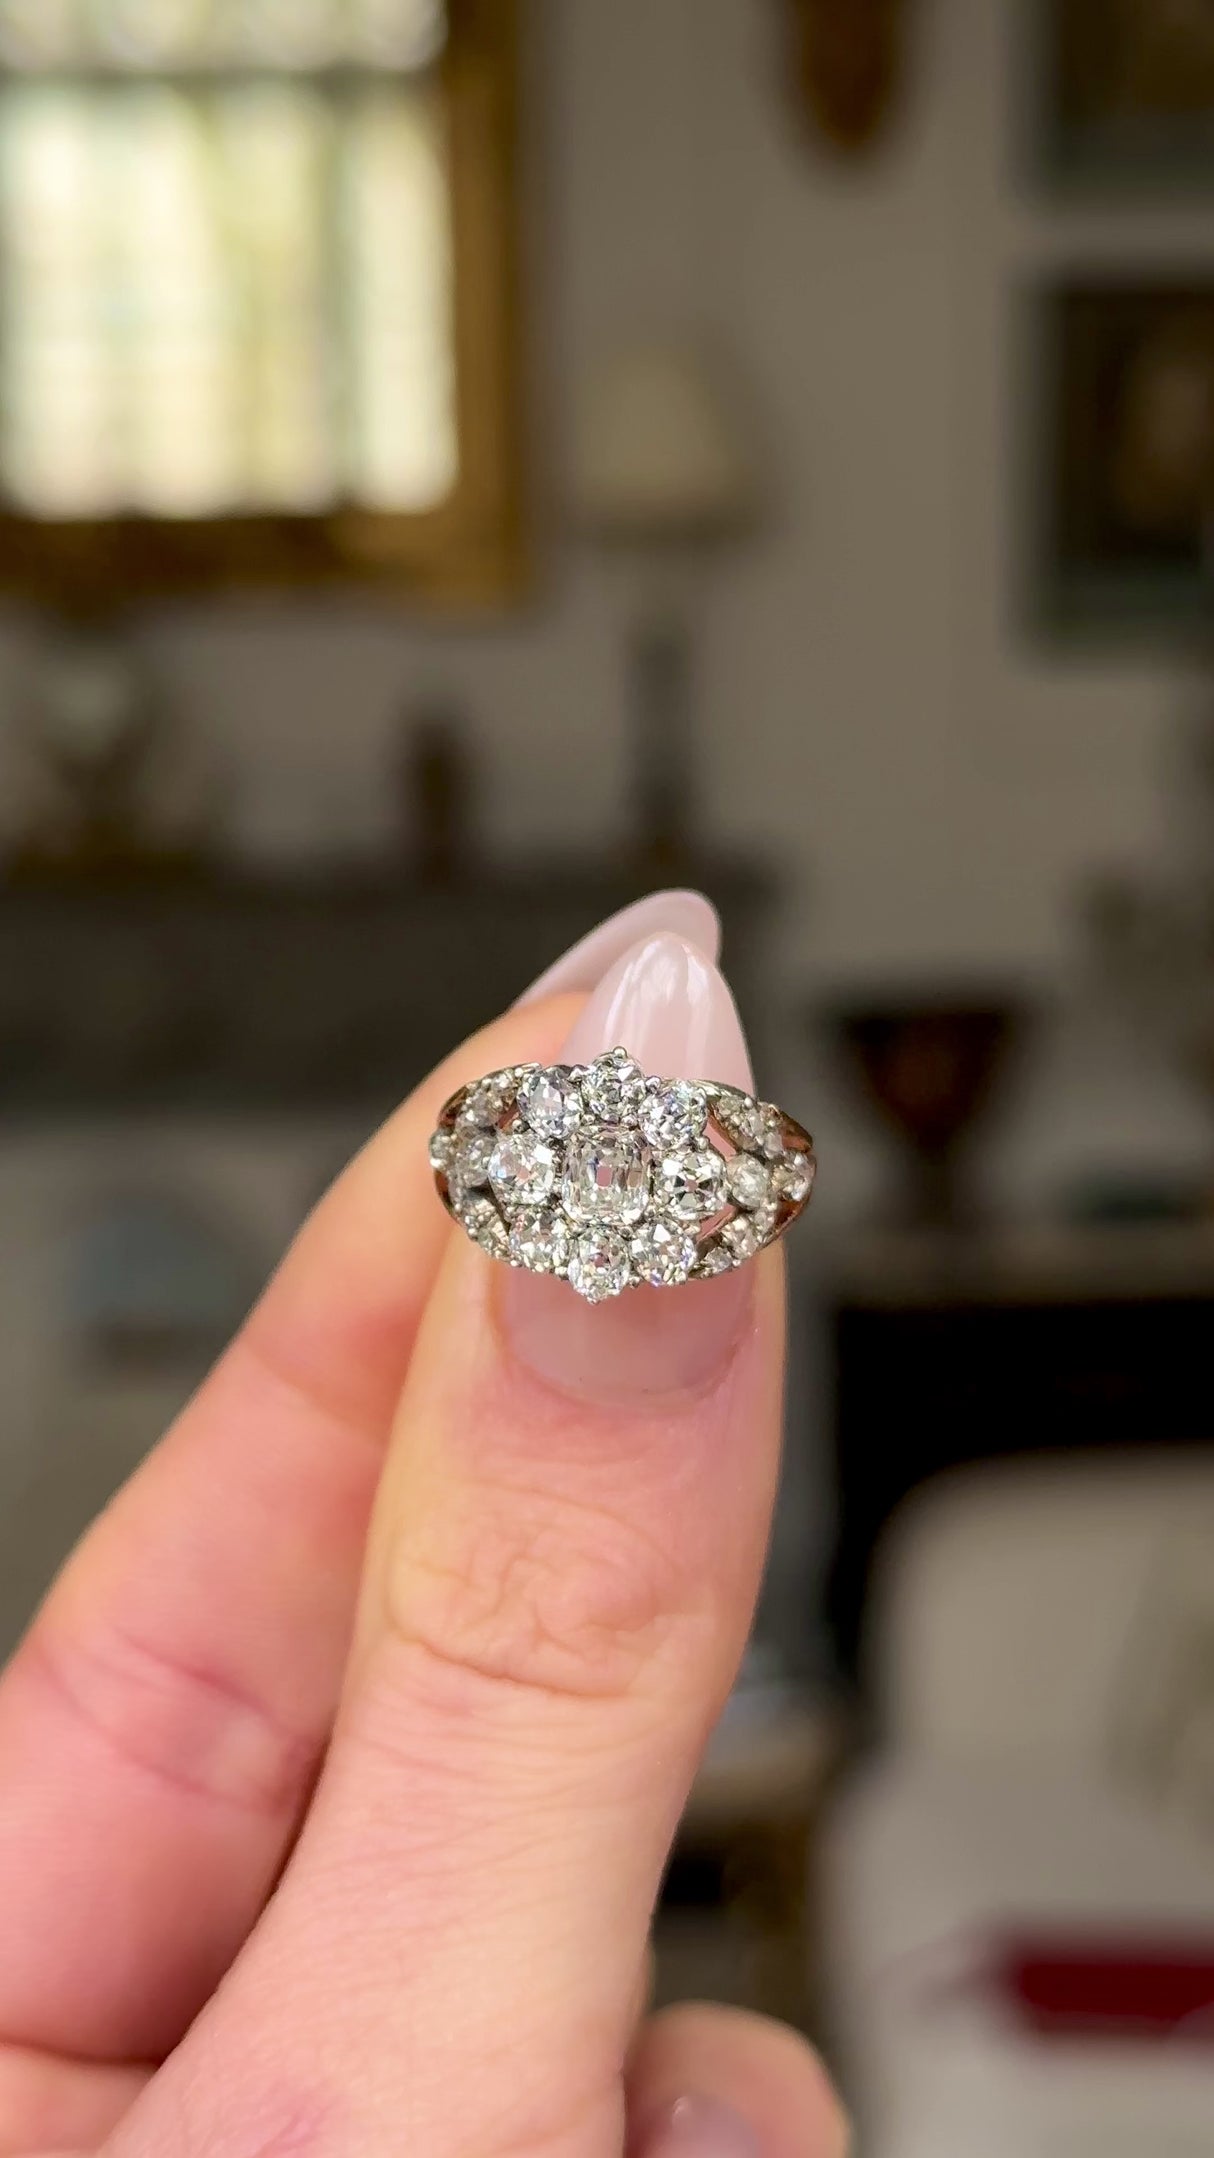 Antique, Georgian Diamond Cluster Ring, rotated to give perspective.